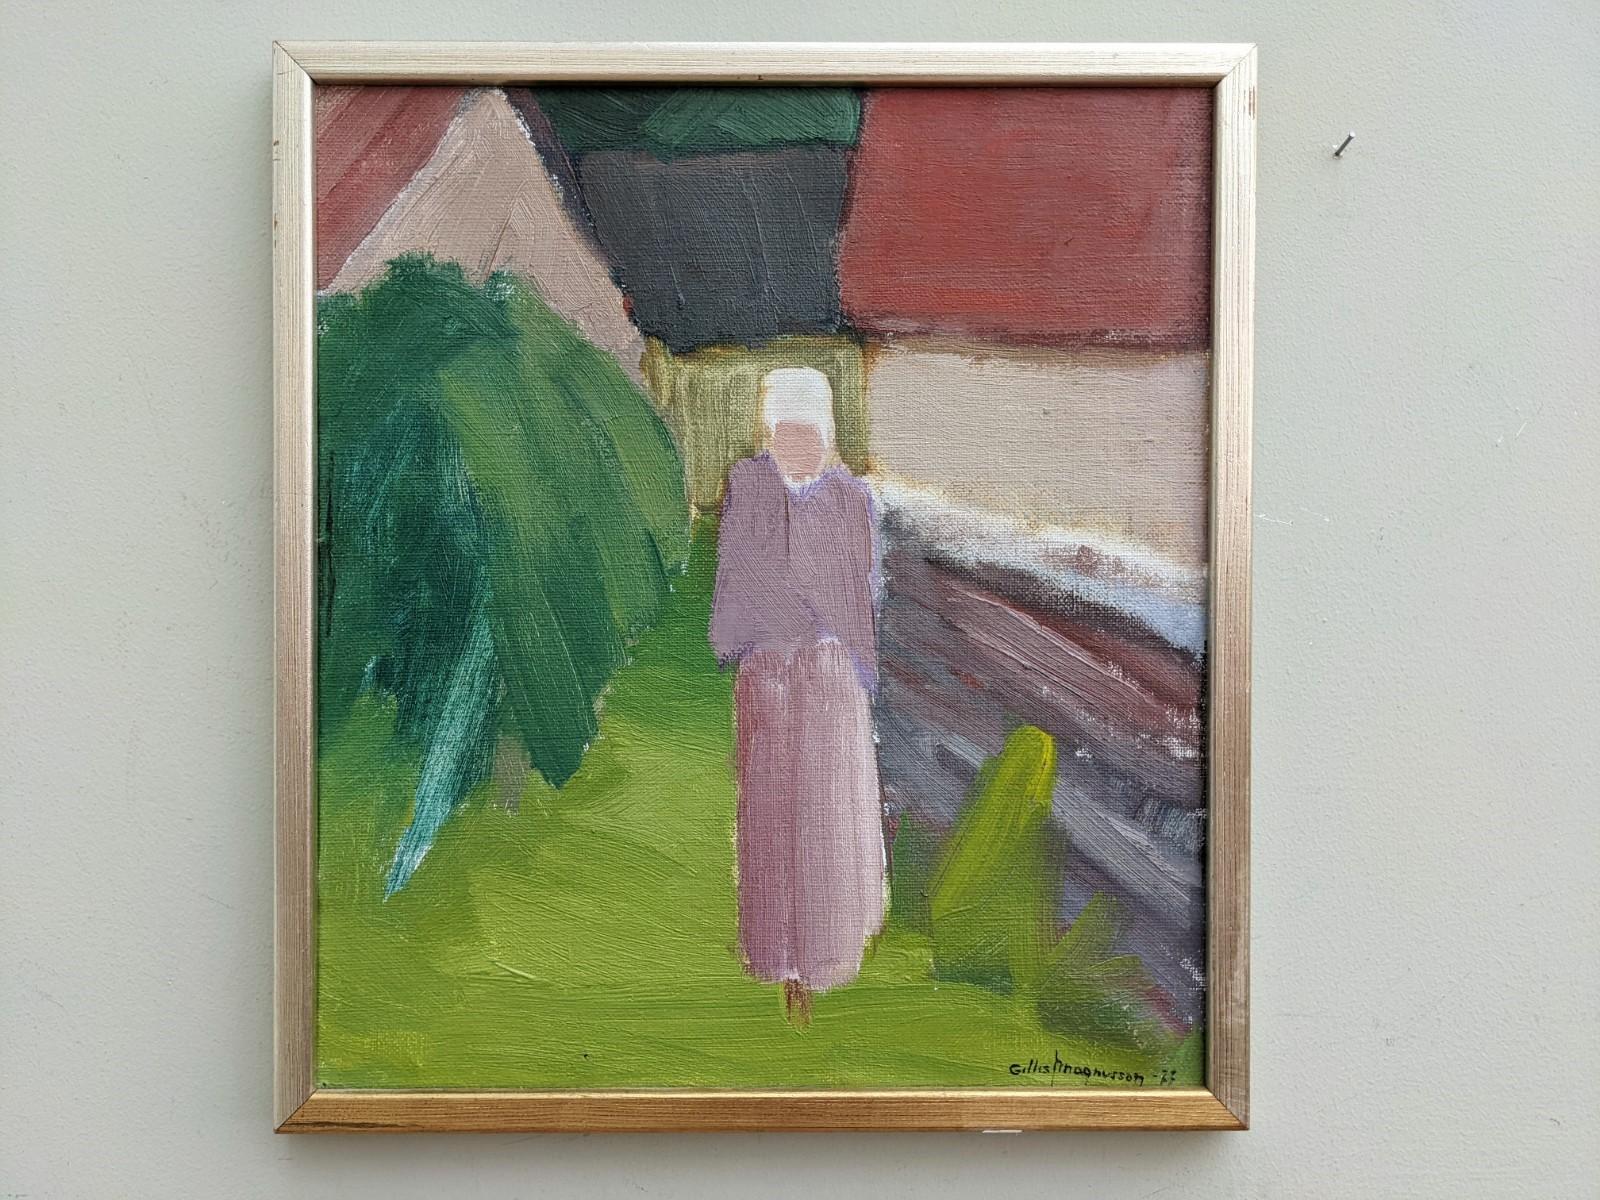 PENSIVE WALK
Size: 41 x 36.5 cm (including frame)
Oil on canvas

A small but very charming mid century modernist figurative scene, painted in oil onto canvas in 1977.

Broad, expressive brushstrokes fill the canvas, creating a composition of a